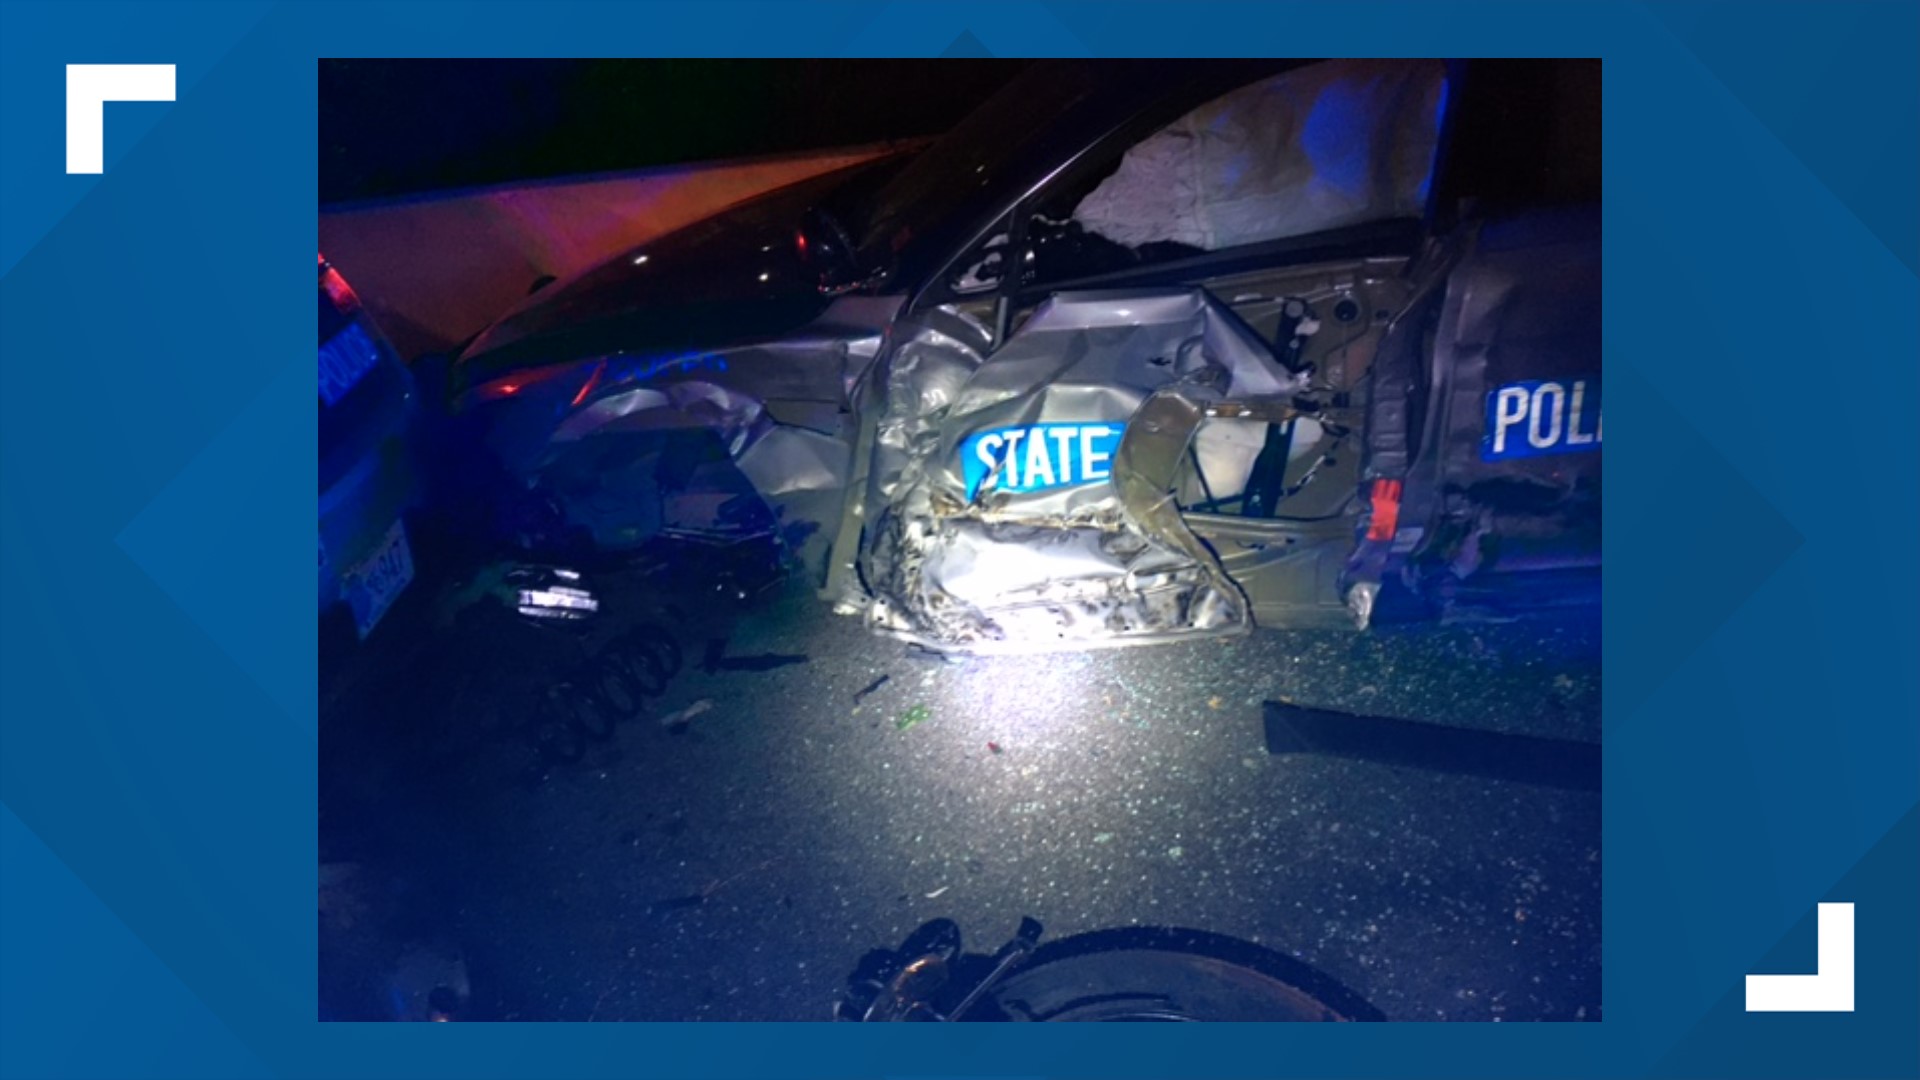 Both troopers were not in their vehicles at the time of the crash and were not injured, State Police said.